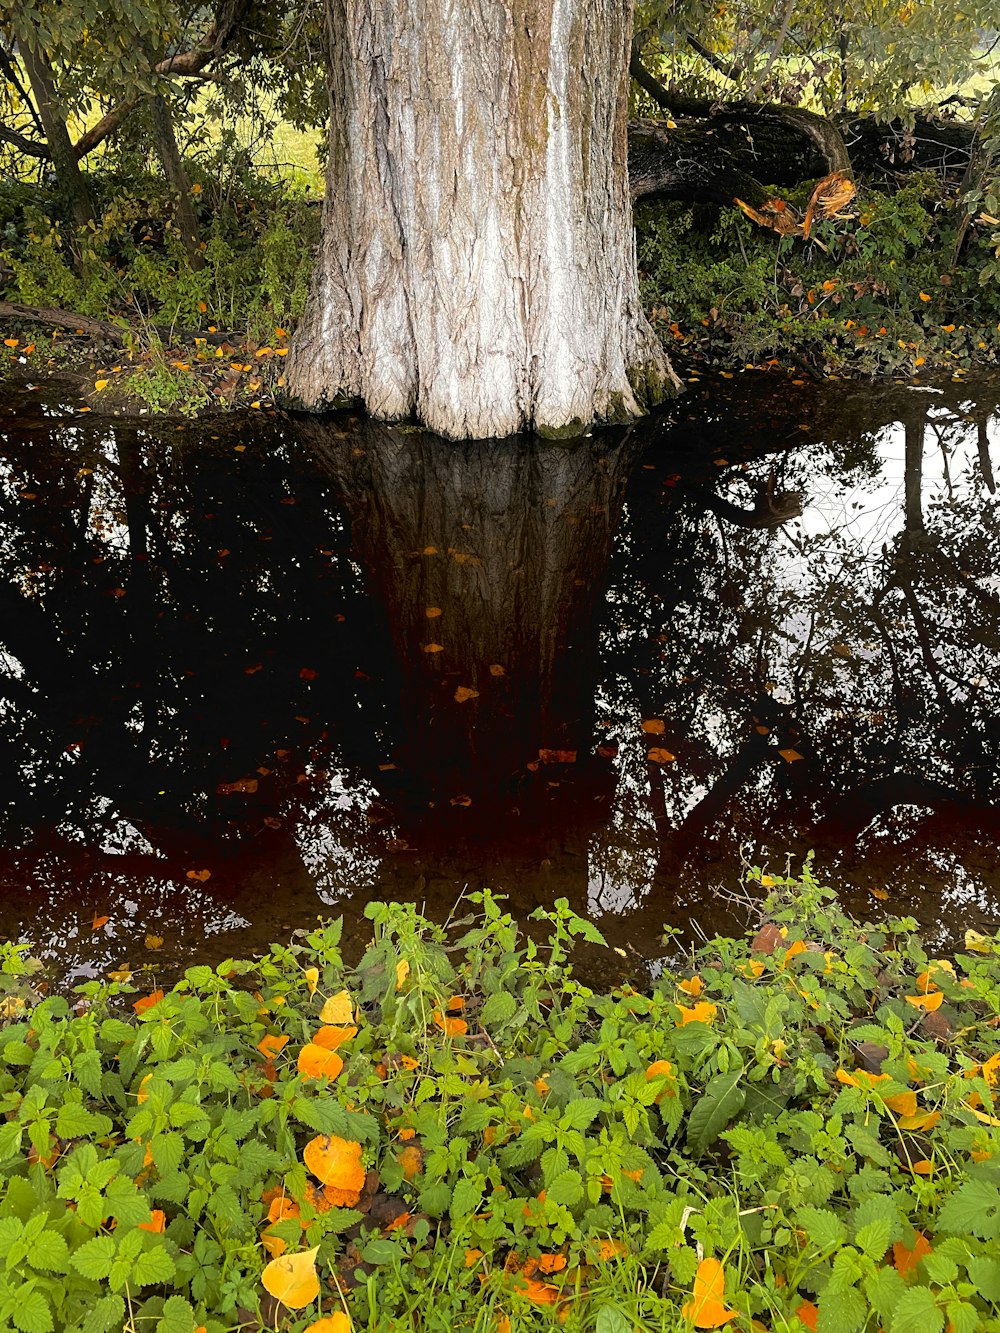 a tree next to a body of water